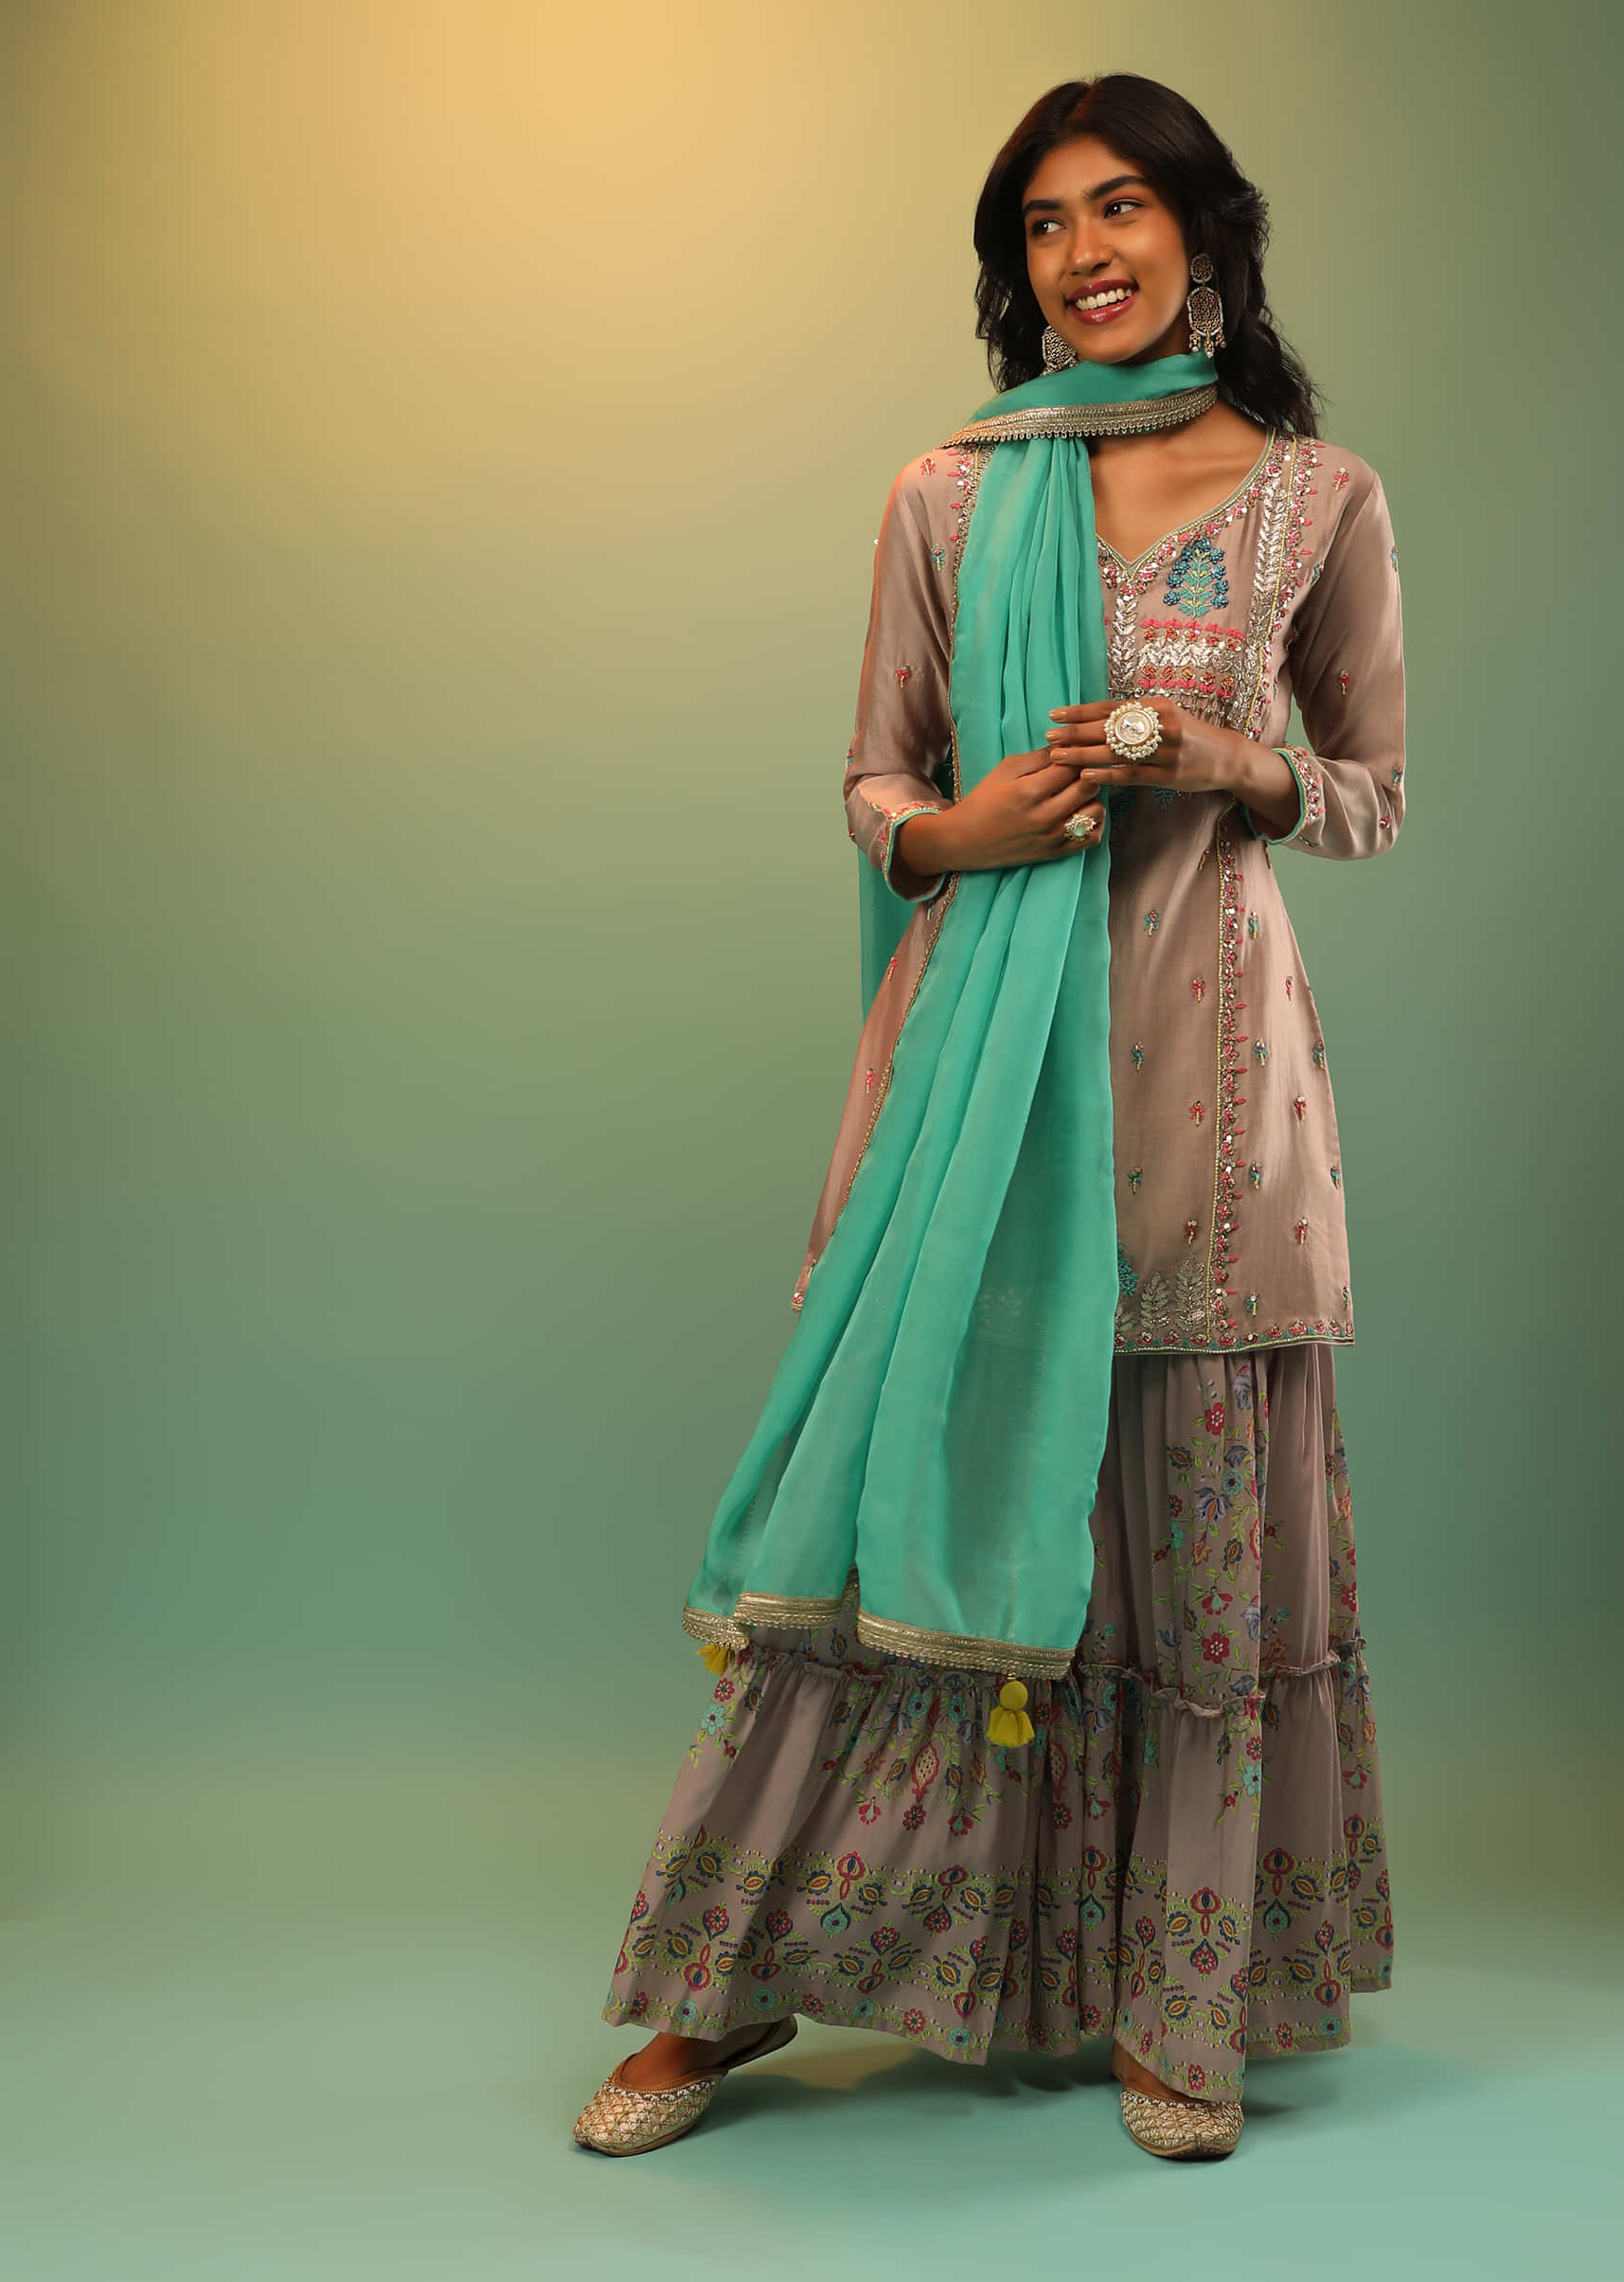 Buy Now,Be Indi Womens Pink Floral Kurta And Fuchsia Tie&Dye Flared Sharara  Pants And Dupatta With Tassels. – BE INDI